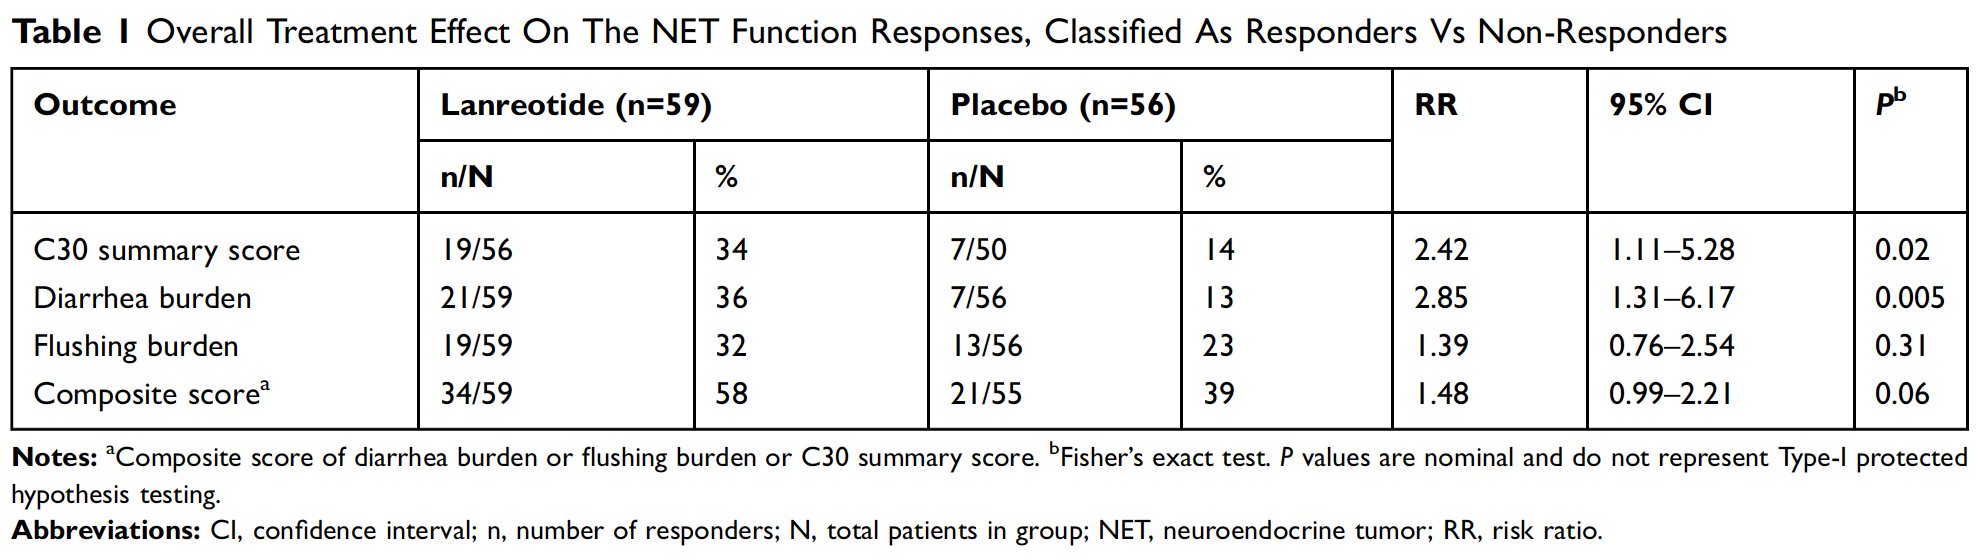 patient-outcomes-table-1